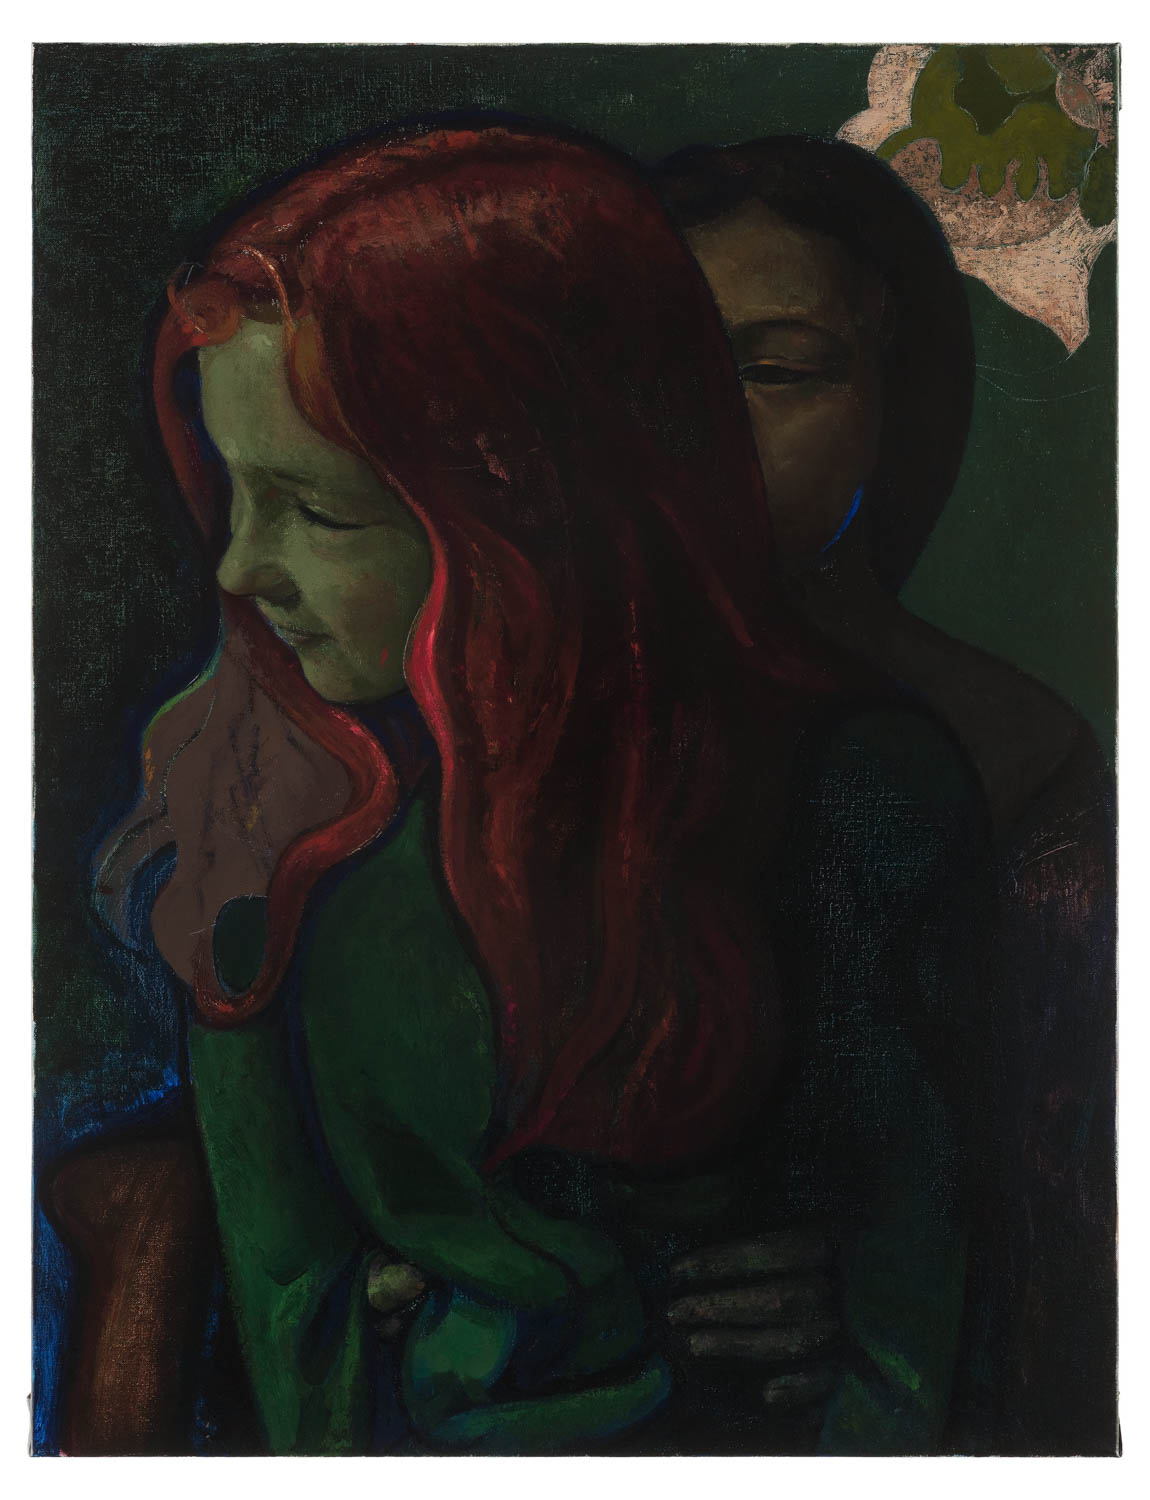 <i>Red and Dark Haired Sisters</i>, 2017<br />Oil on canvas<br />28 3/4 x 22 inches (73 x 56 cm)<br />29 1/2 x 23 x 1 1/2 inches (74.8 x 58.3 x 4 cm) framed<br />